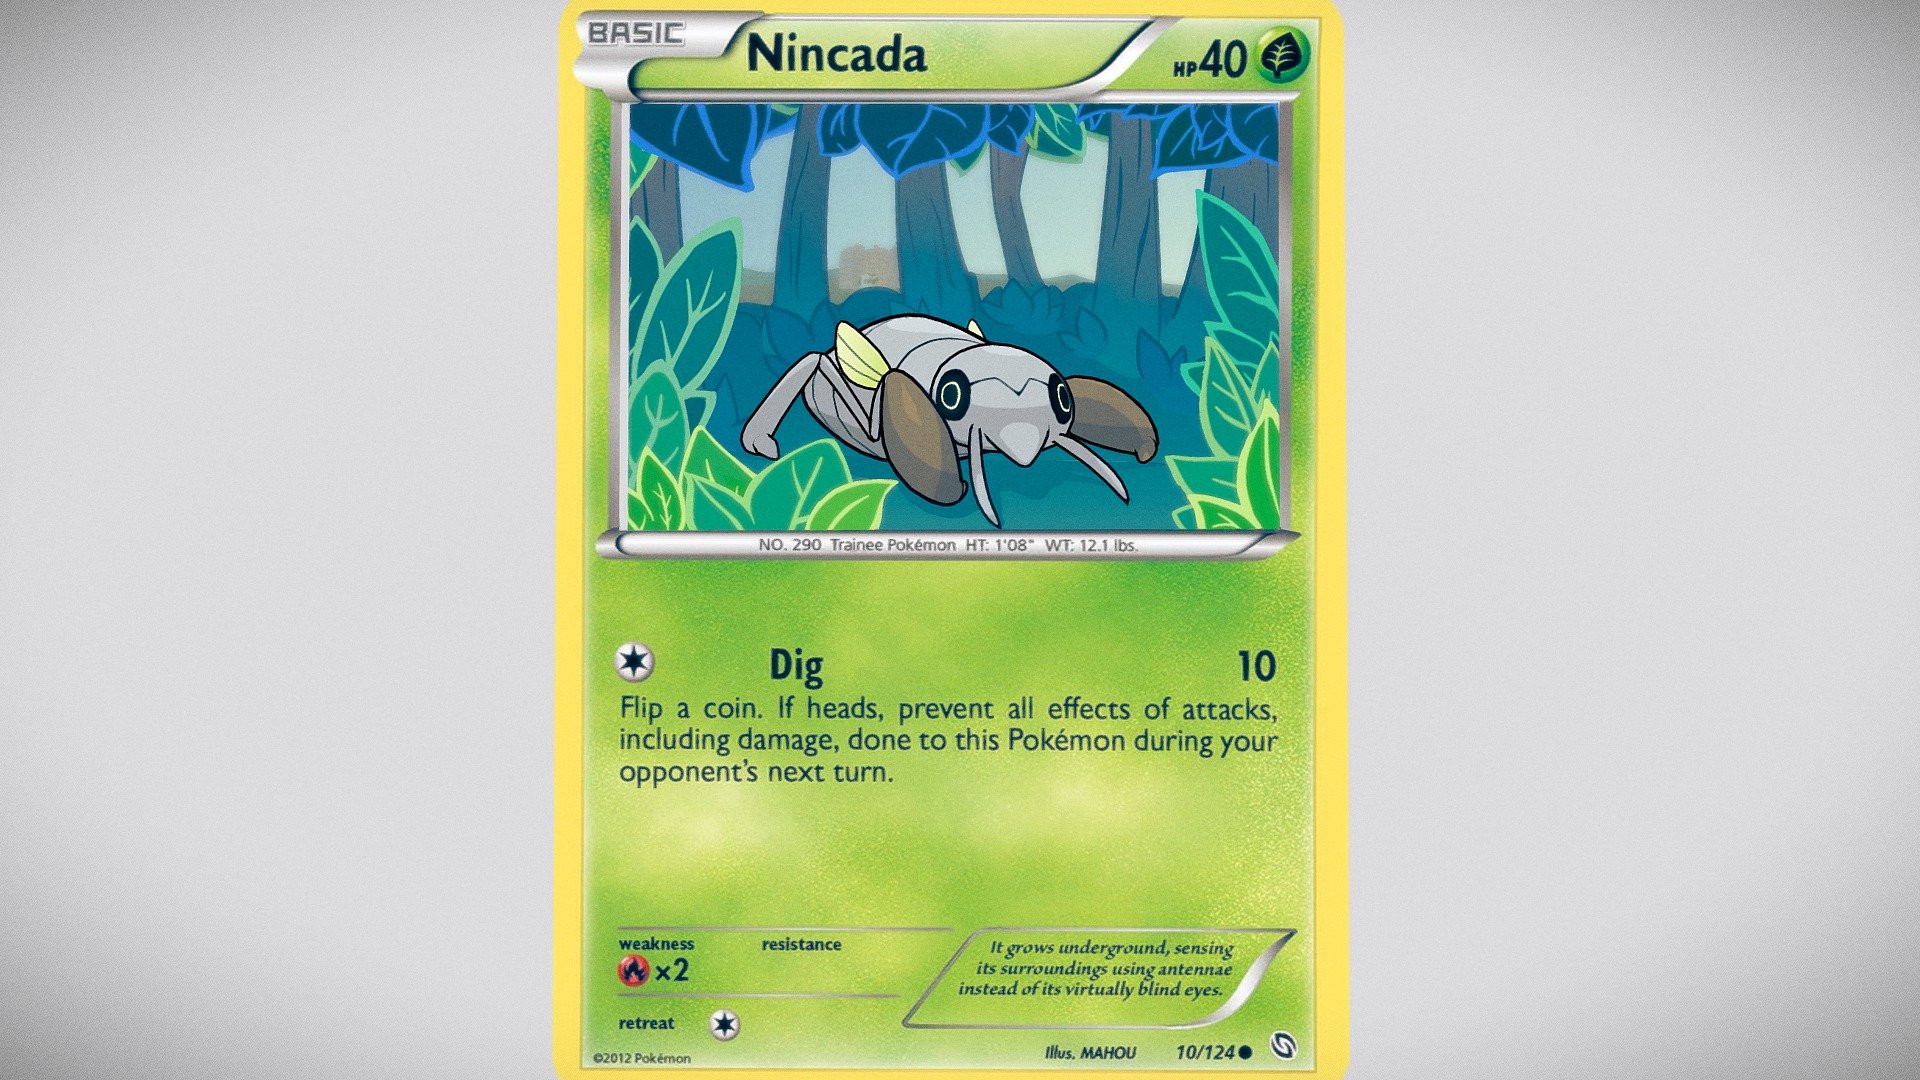 A fun side project with the goal of recreating a Pokemon card with the picture being 3D. This card is actually one which I have, and chose because I like the style and the parallax layers, and thought it would be an easy one to try out. I definitely want to do more of these in the future!

The most difficult part was actually just that Maya wouldnt render so many planes at once. So I had to reupload as a draft to sketchfab to check the model, and tehn make my changes based on the sketchfab model.

You can see the original card here:
https://pkmncards.com/wp-content/uploads/en_US-BW6-010-nincada.jpg - Nincada - Pokemon Card - 3D Model Recreation - 3D model by Hayley Jacka (@HayleyJacka) 3d model